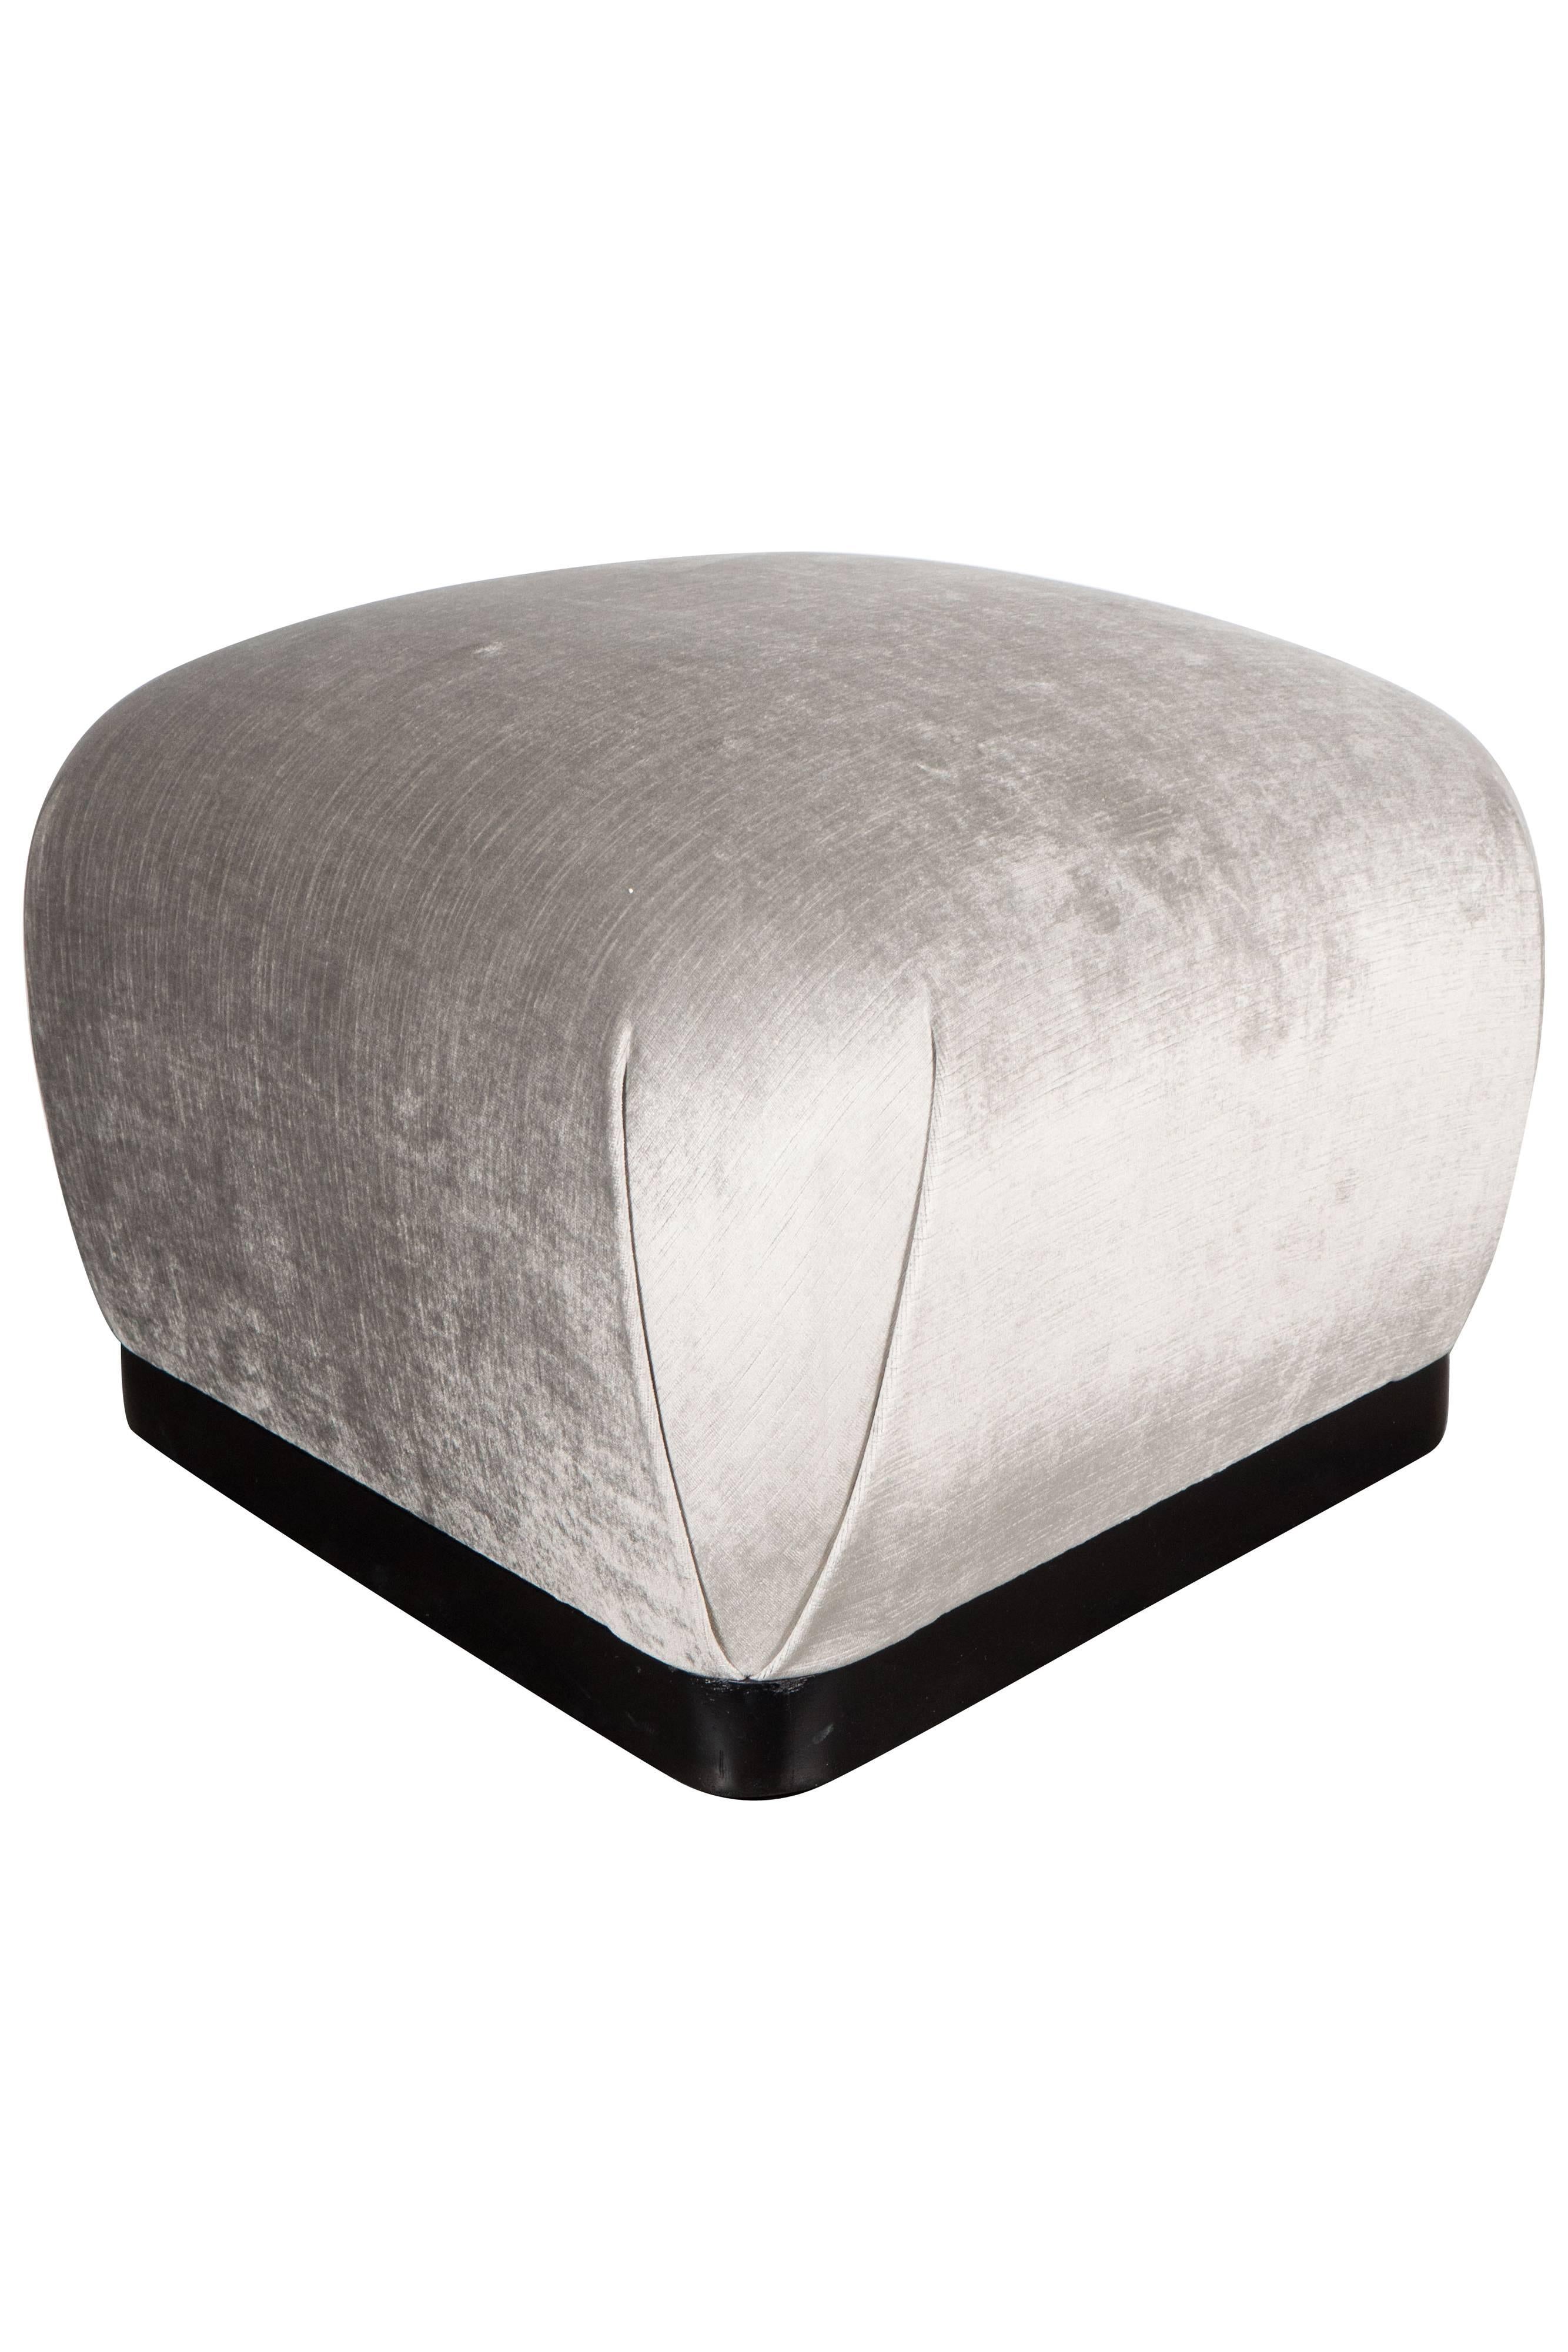 A Souffle style ottoman in smoked platinum velvet in the manner of Karl Springer. An ebonized walnut base with gliders supports a rounded cushion, newly upholstered in a luxe smoked platinum velvet fabric. It can be used as an ottoman, additional